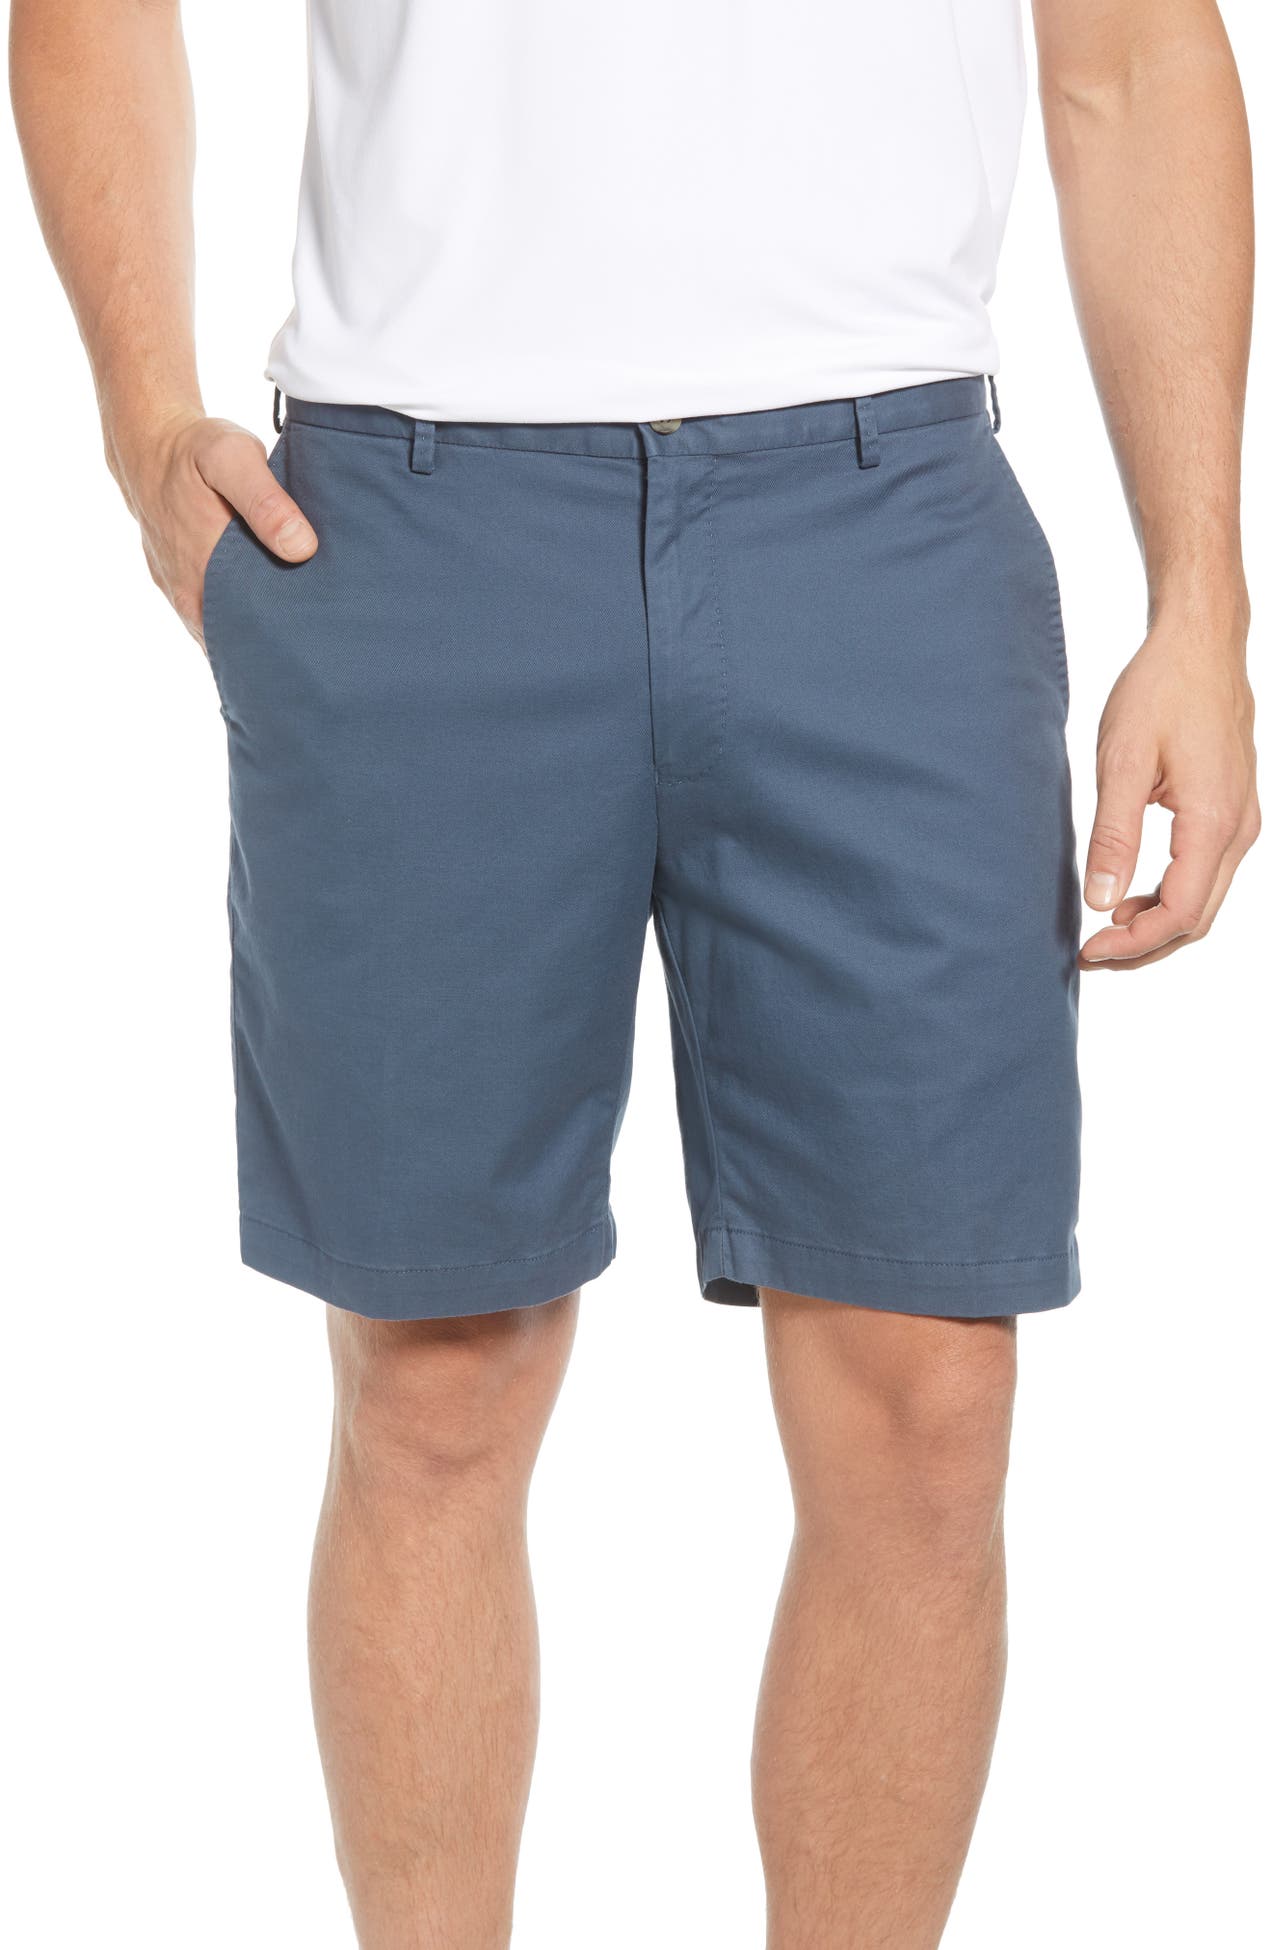 Peter Millar Soft Touch Twill Shorts Nordstrom Rack